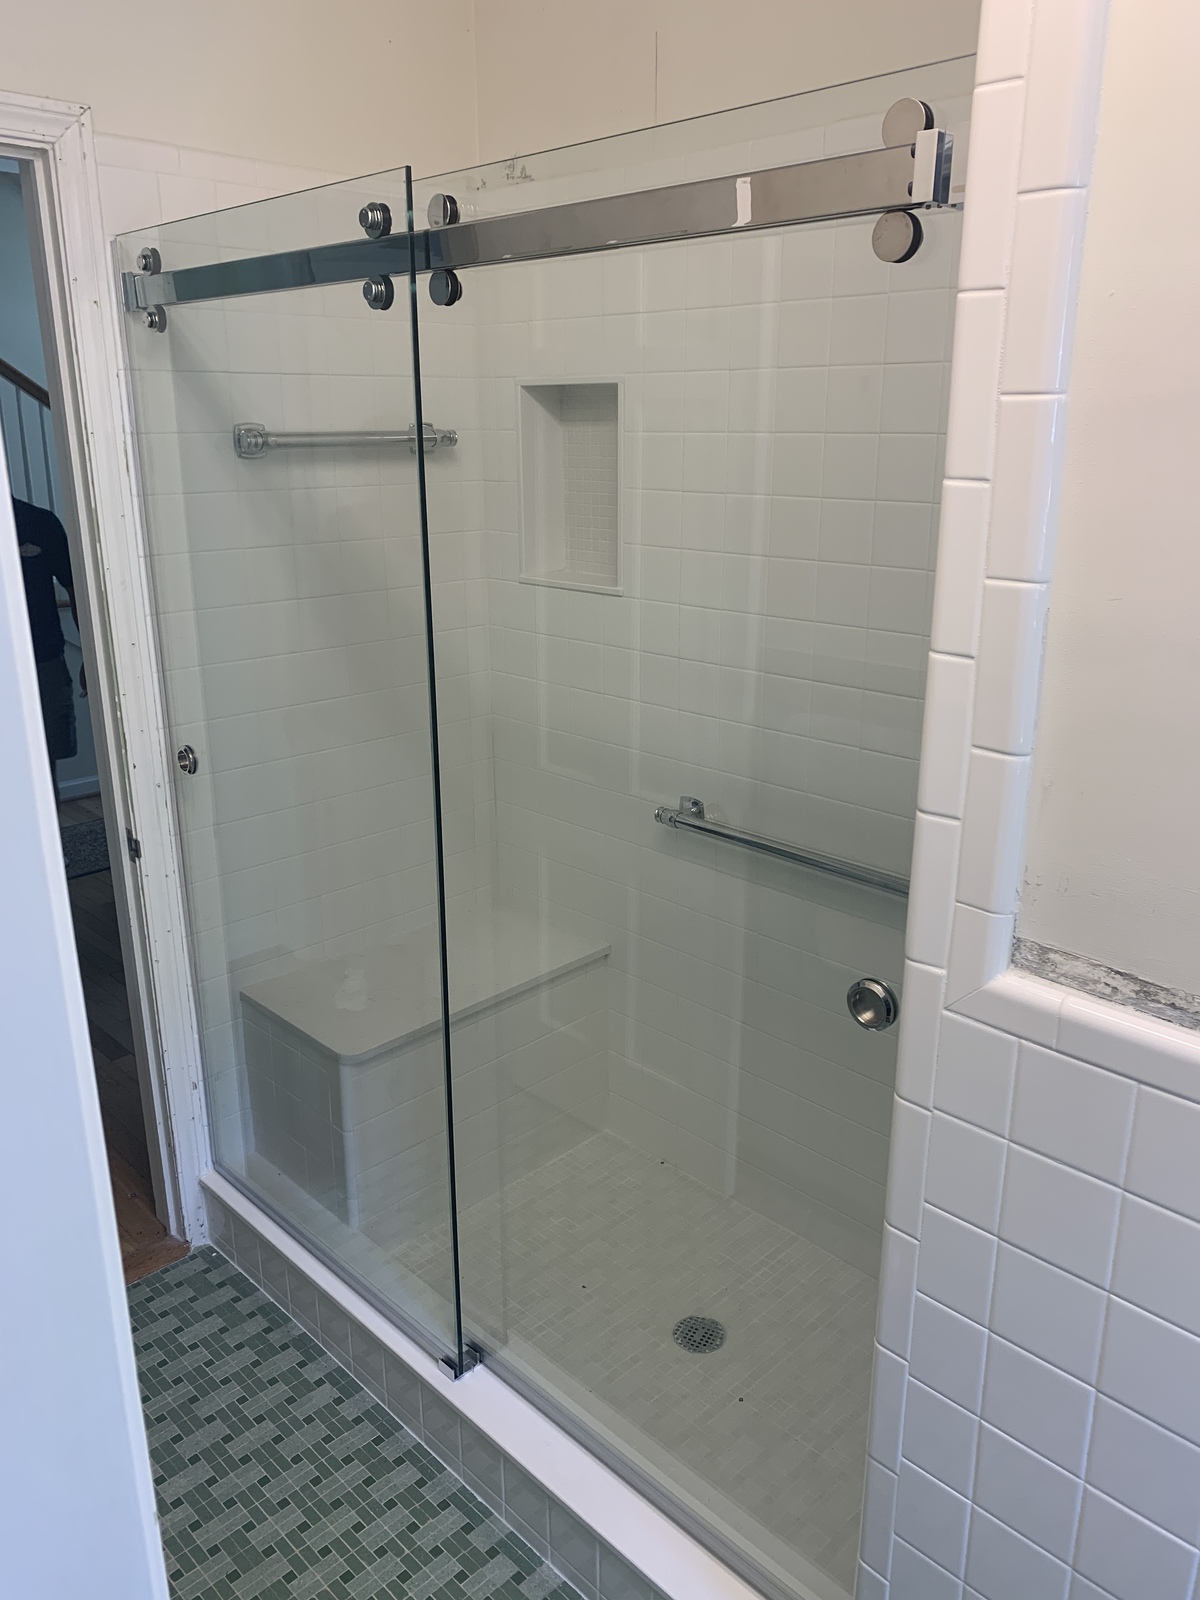 A Cambridge style slider from CR Laurence is a barn style slider and allows both doors to slide. The handles can be customized to your needs, however, the knobs on this shower are called "finger cups" which allow the doors to bypass. 